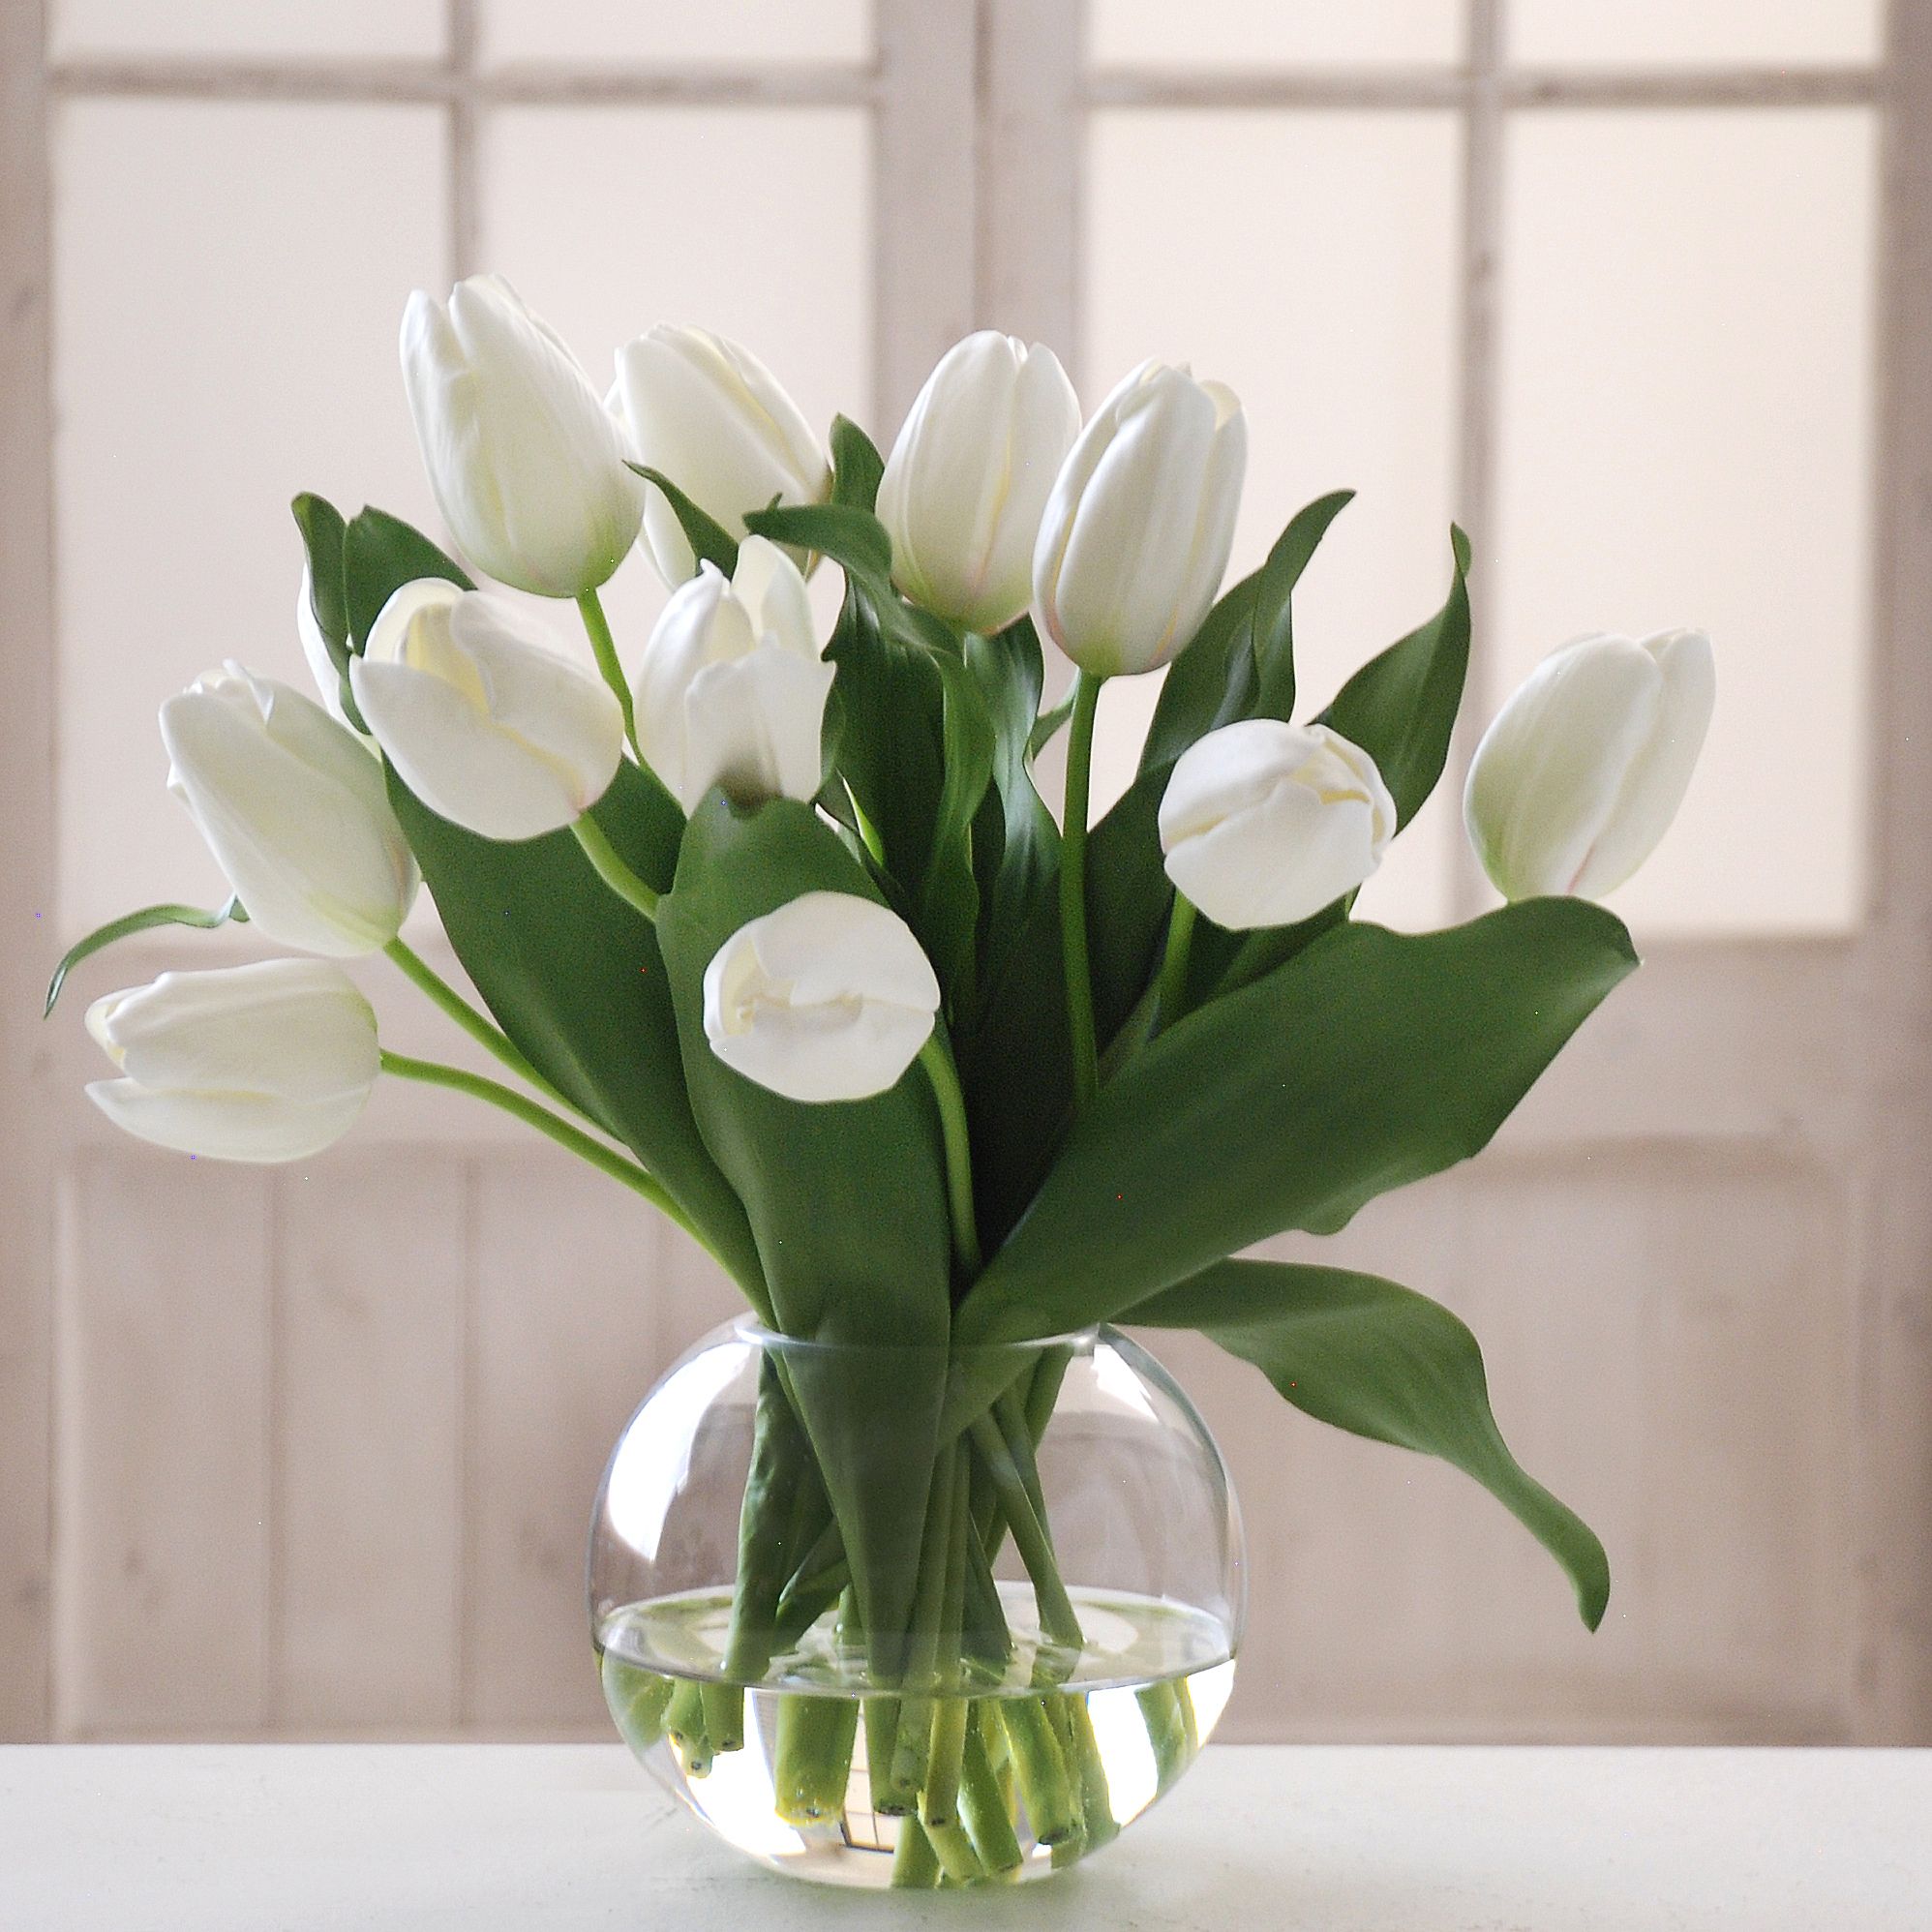 White Tulips in Bubble Bowl | Flowers, Flower arrangements and Gardens